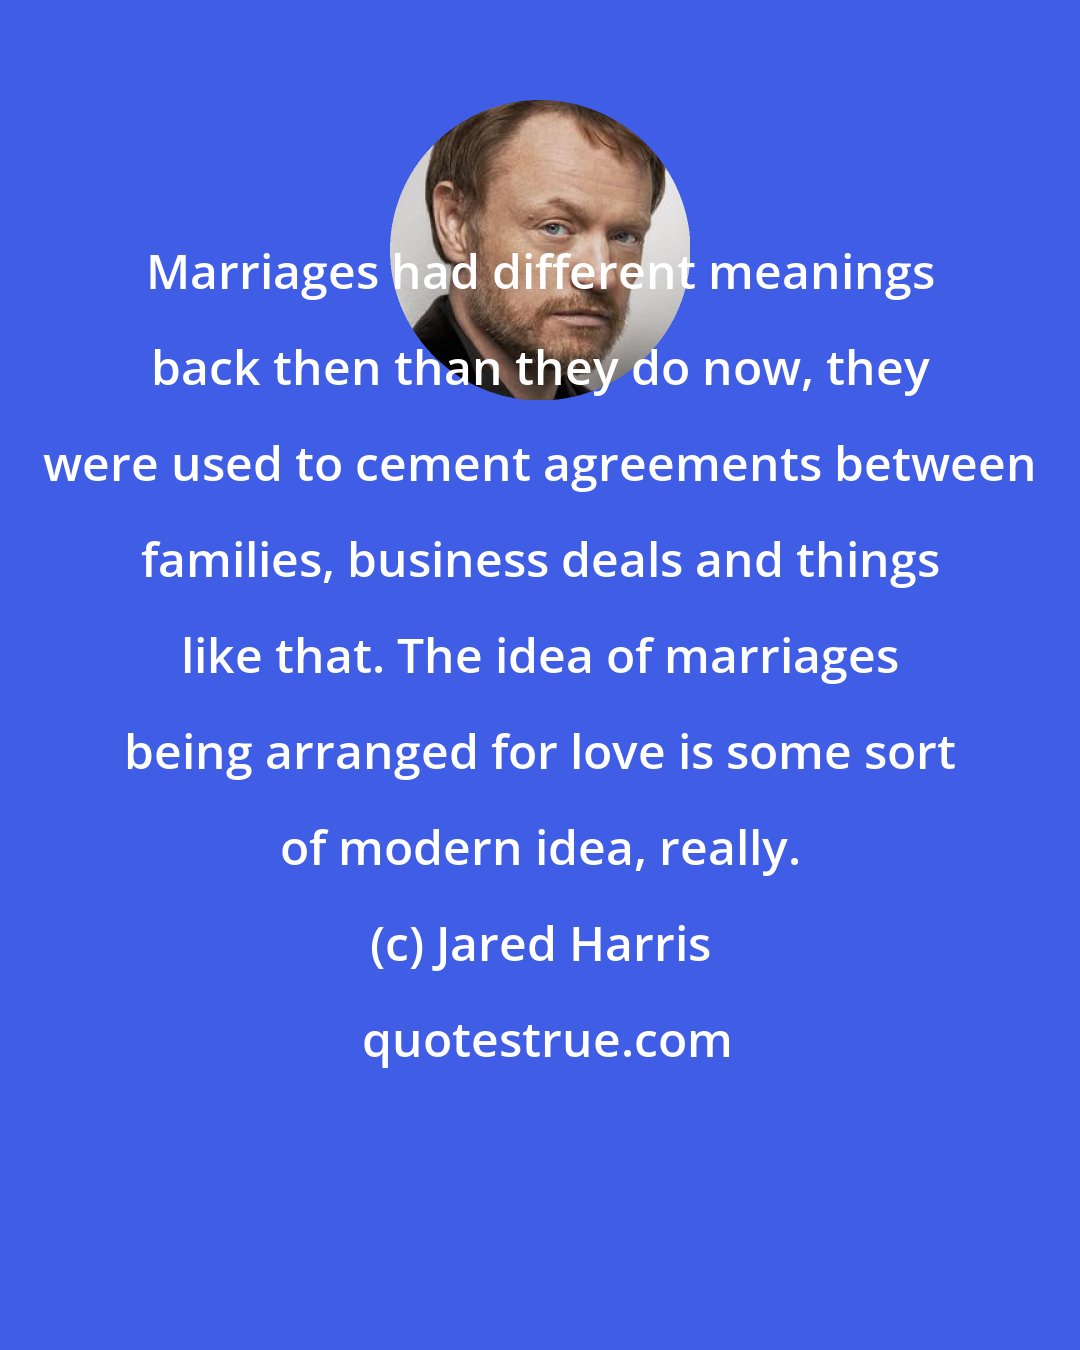 Jared Harris: Marriages had different meanings back then than they do now, they were used to cement agreements between families, business deals and things like that. The idea of marriages being arranged for love is some sort of modern idea, really.